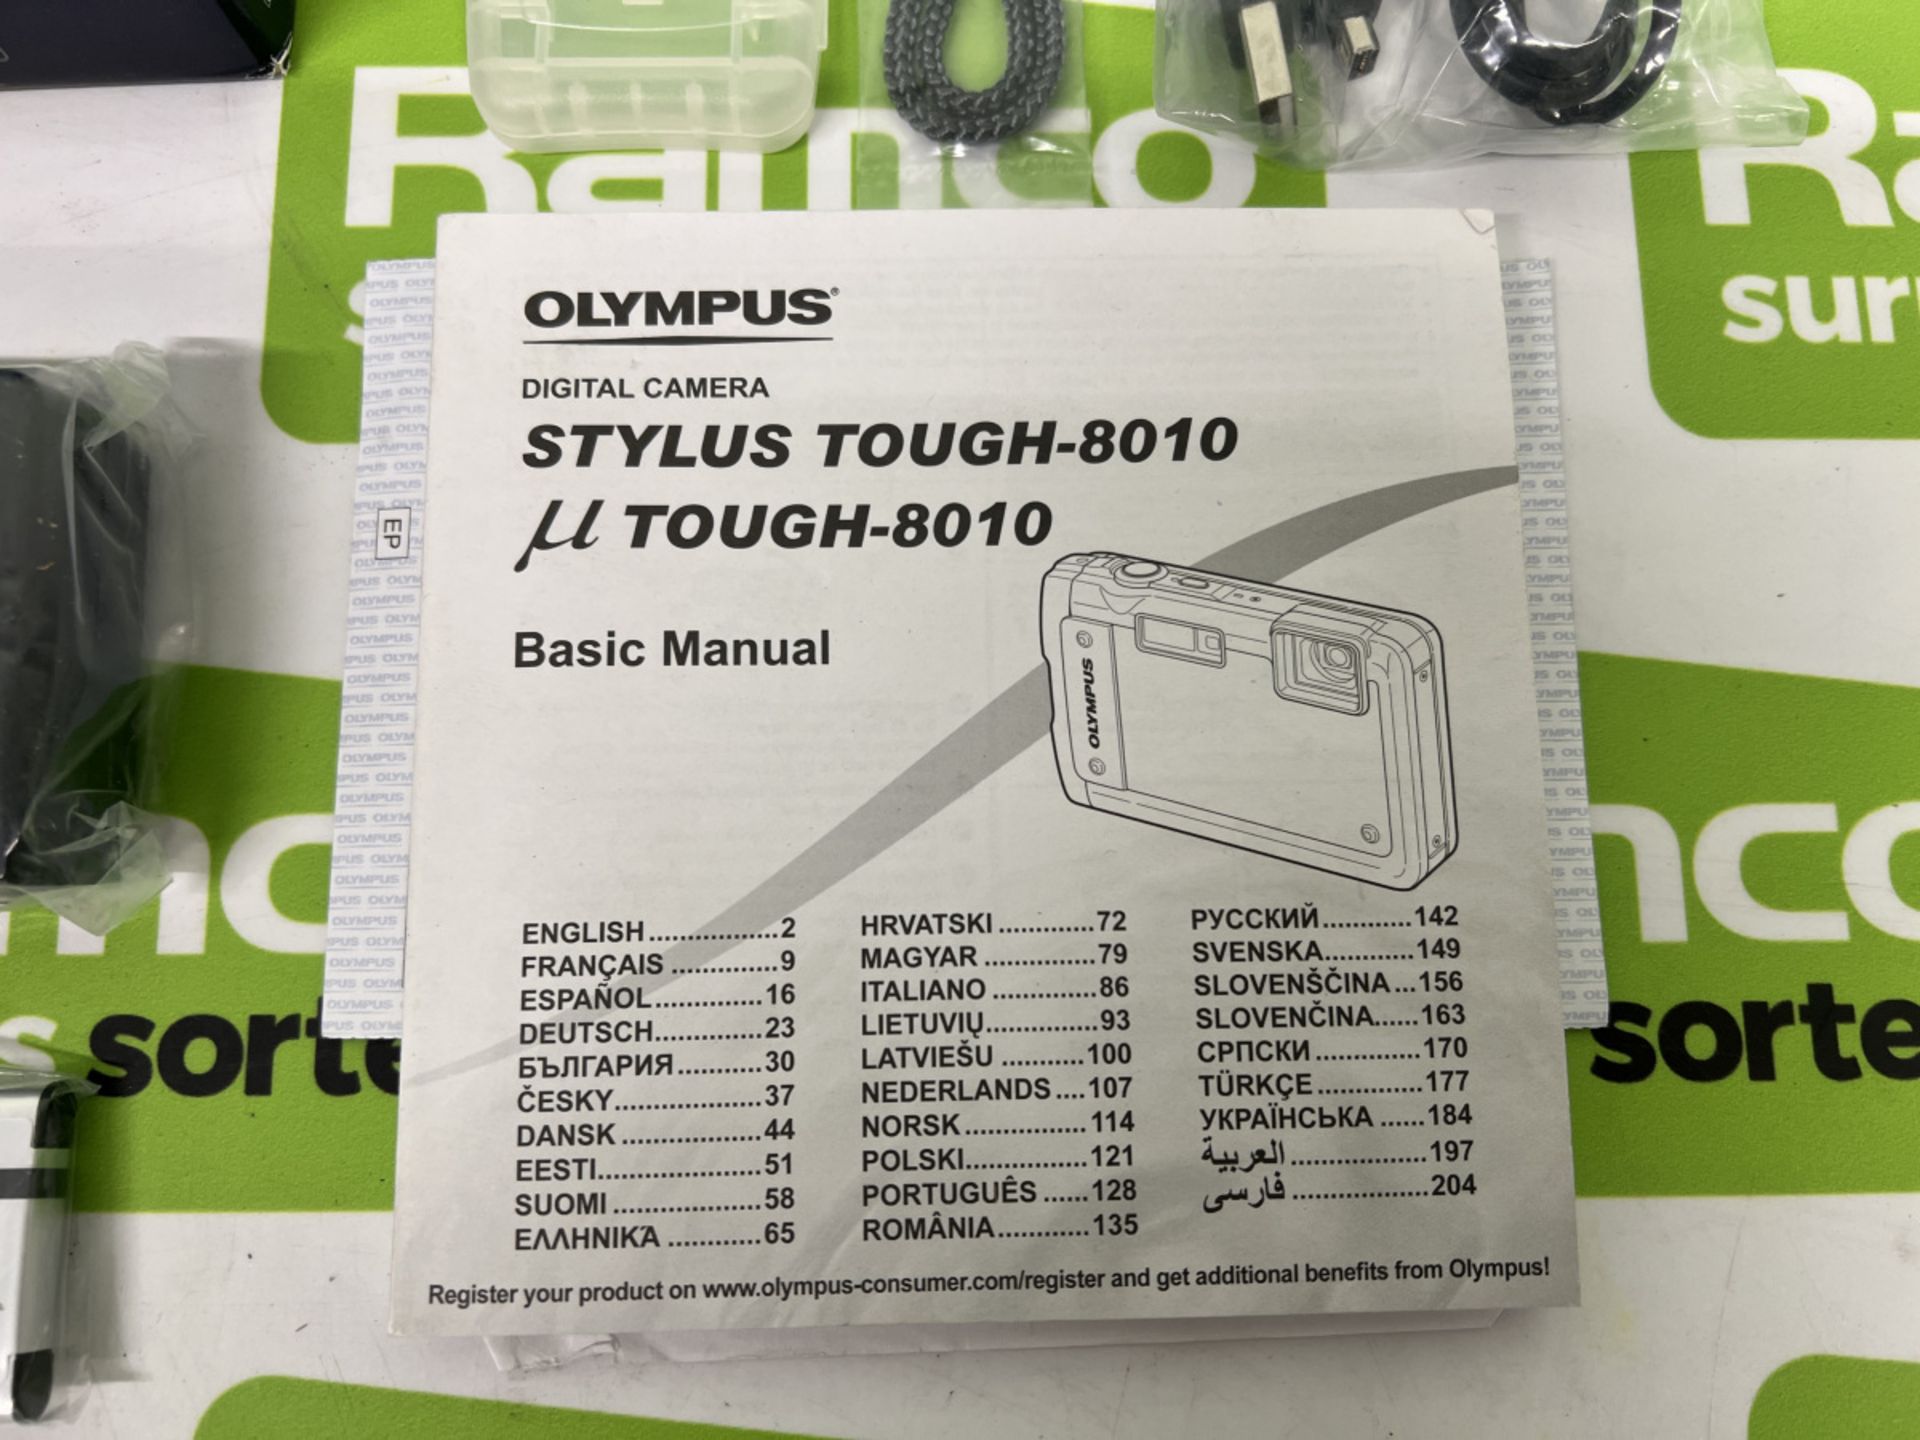 Olympus Stylus Tough-8010 digital camera with accessories - Image 6 of 7